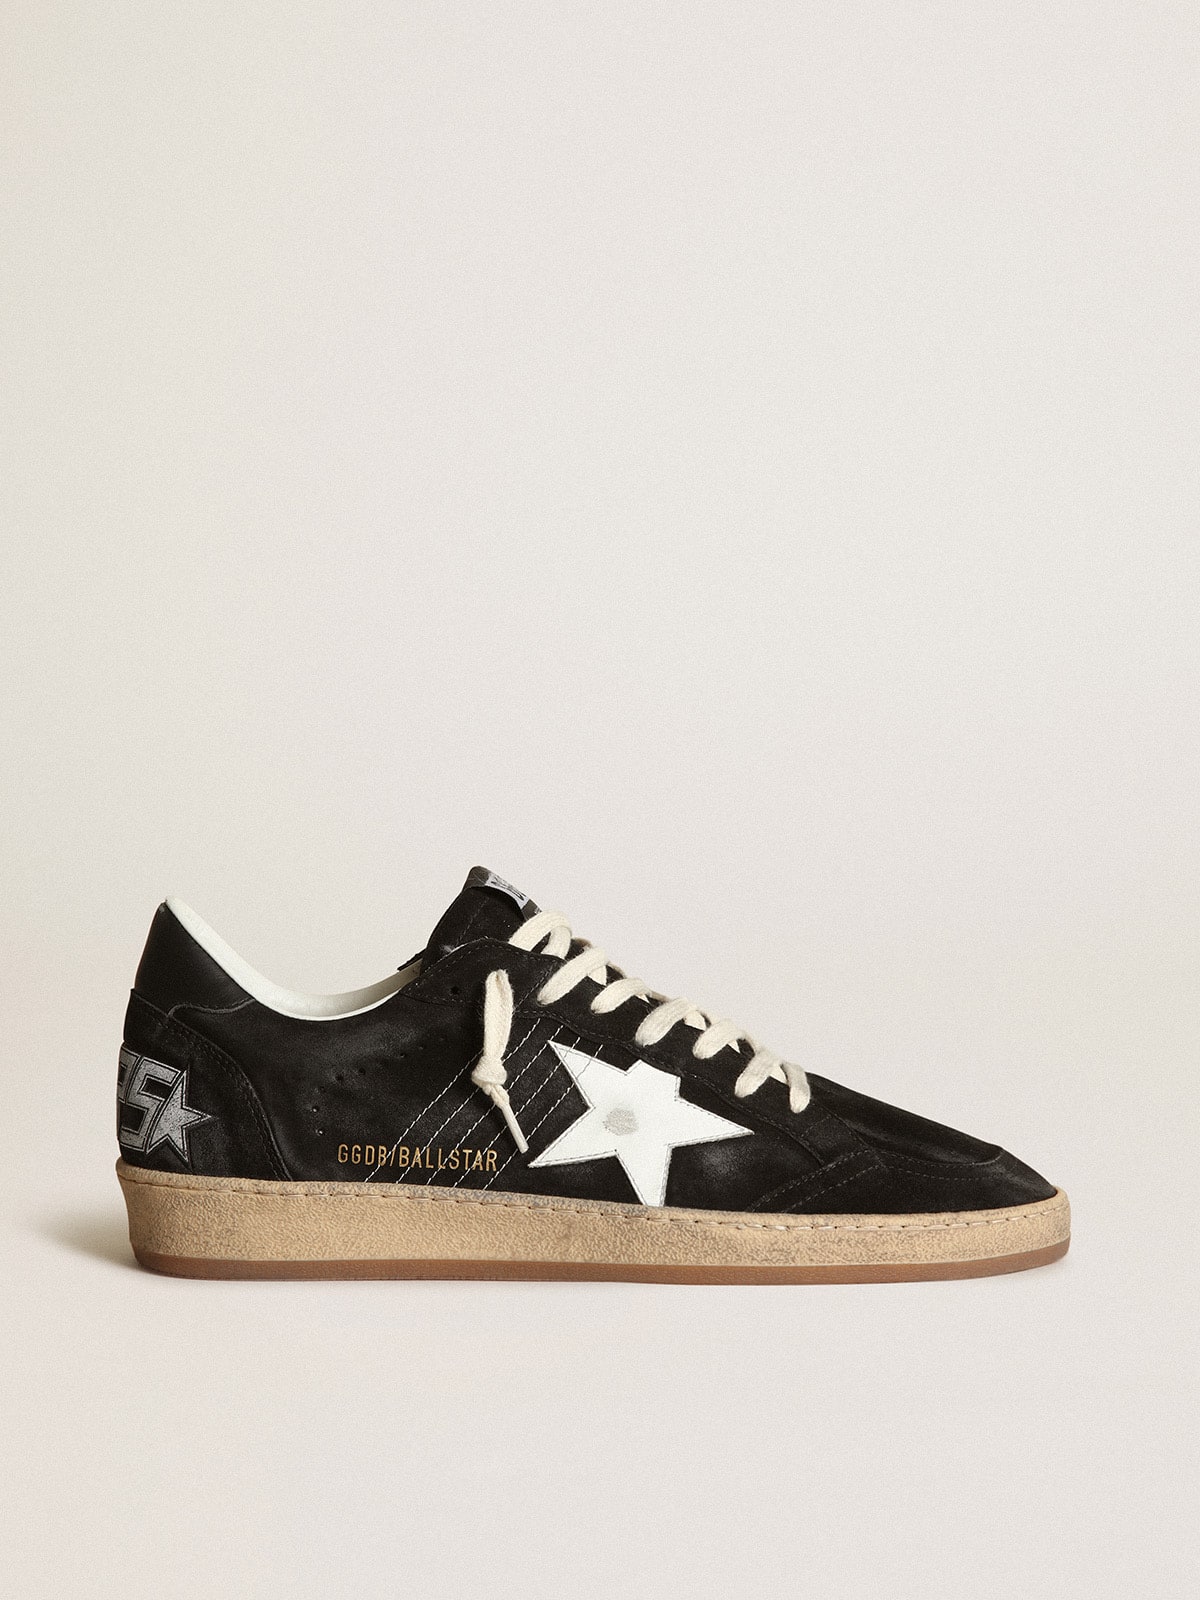 Women's Ball Star in black suede with white leather star